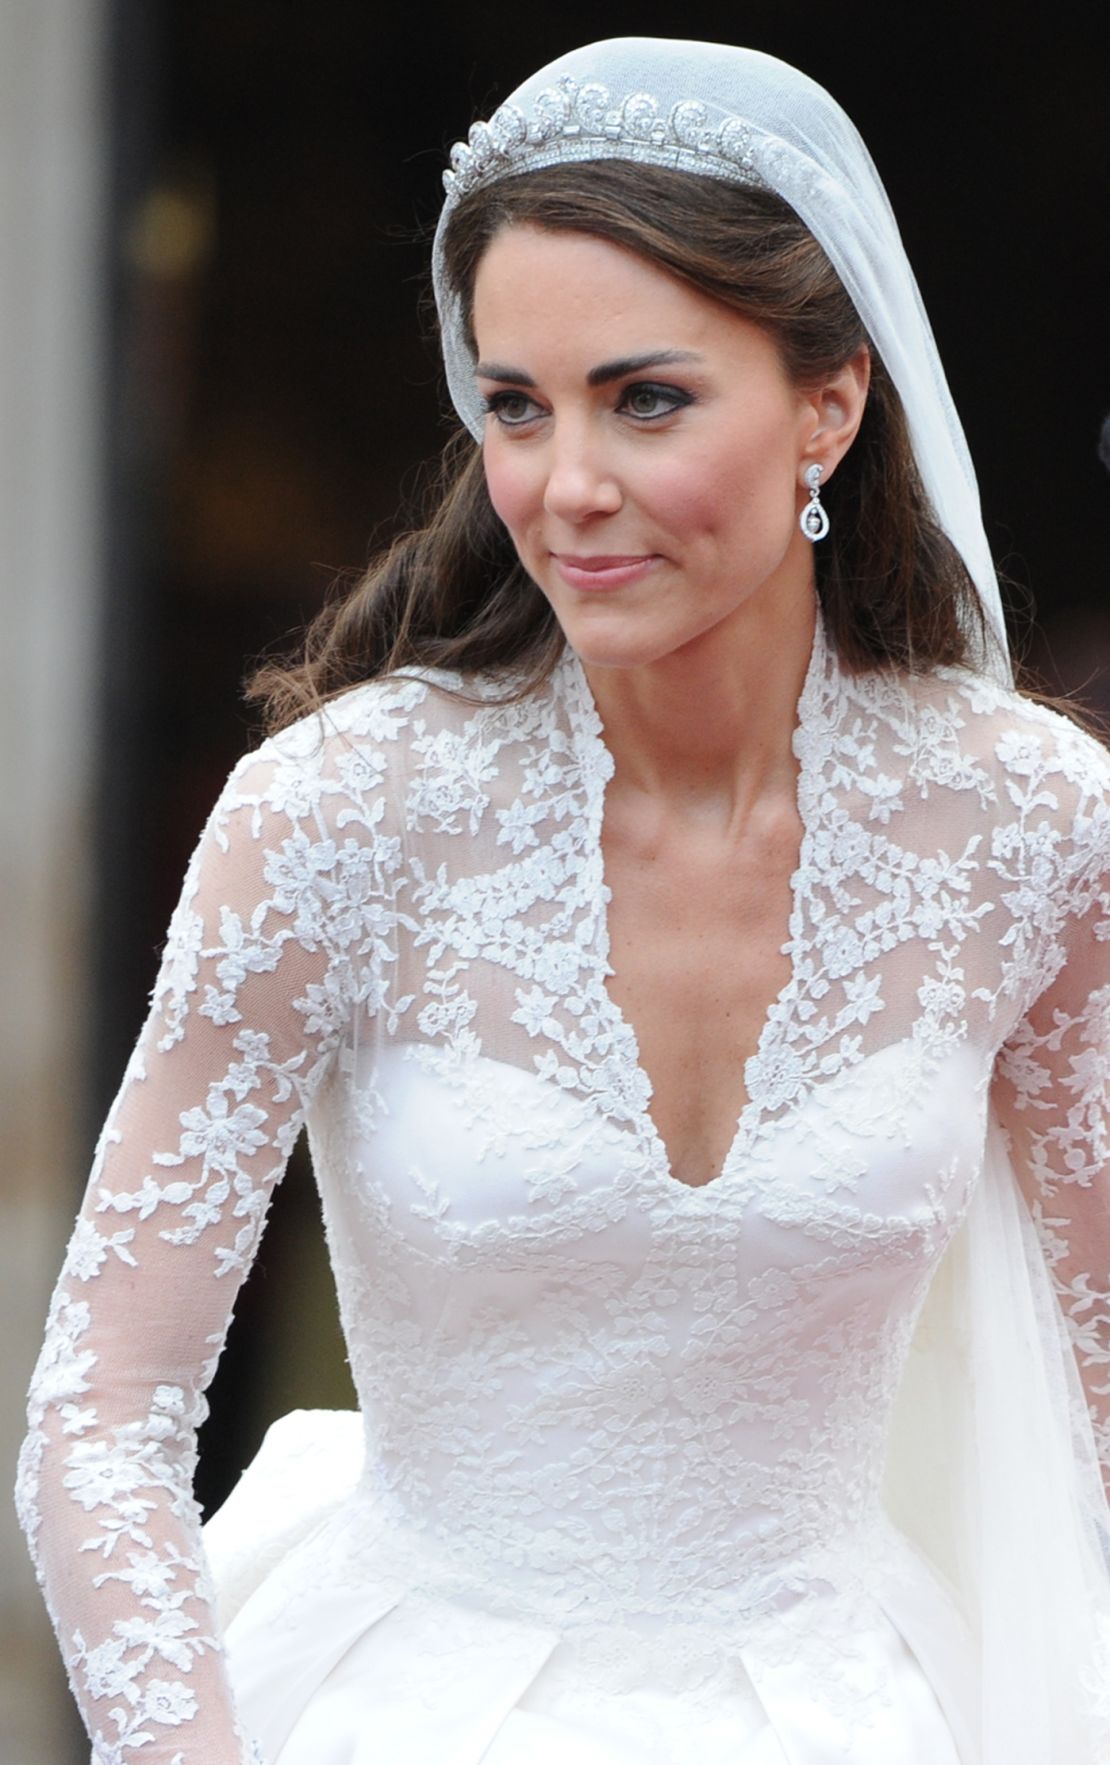 Kate, Duchess of Cambridge, wore white Alexander McQueen when she married Prince William in 2011.